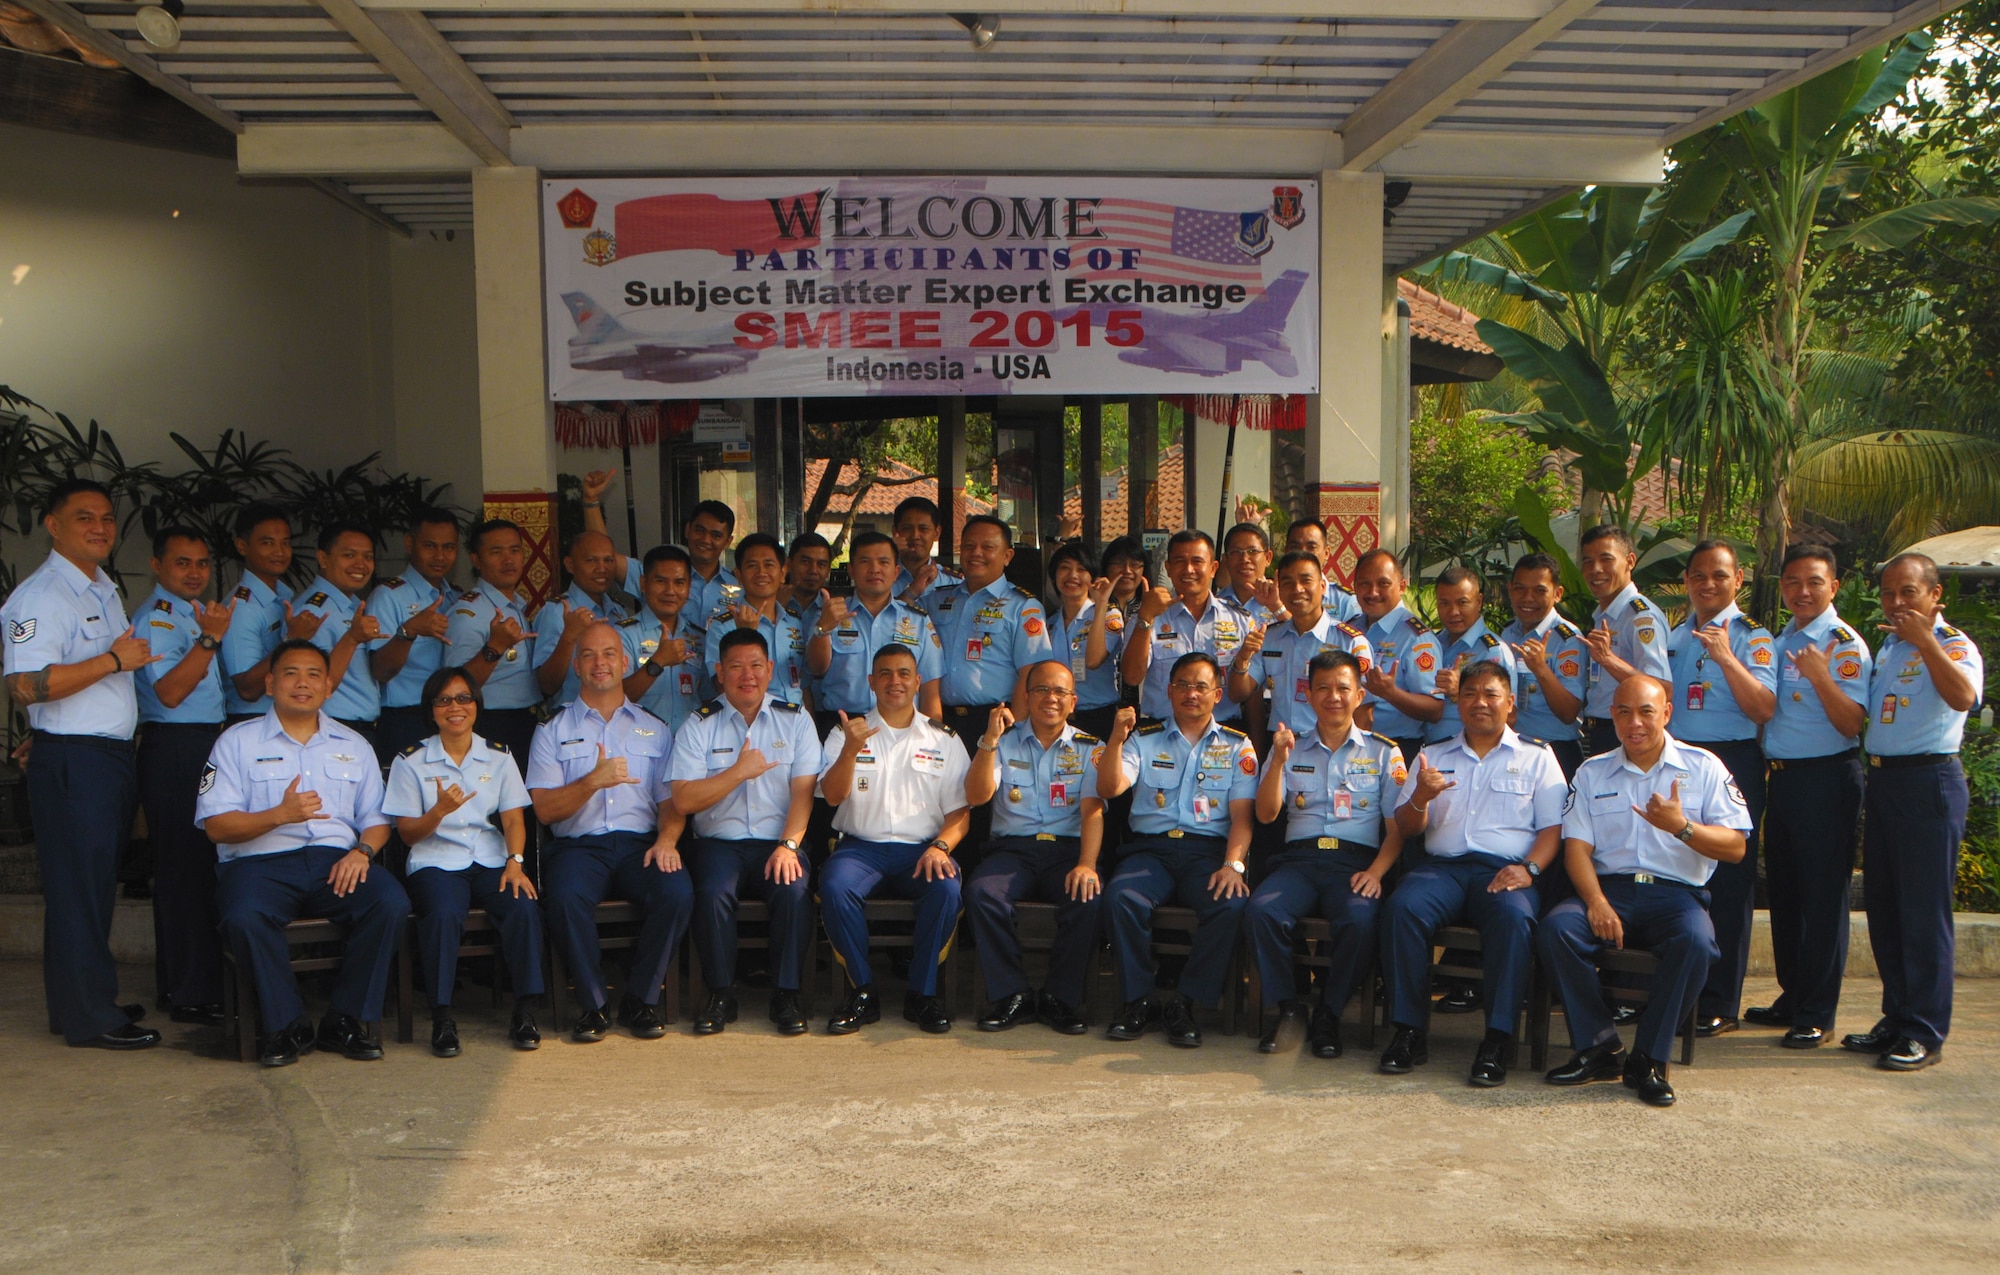 Hawaii Air and Army National Guard members flash the traditional "shaka" sign from Hawaii with members of Kohanudnas, Sept. 15, 2015, Jakarta, Indonesia. Kohanudnas is the air defense component of the Indonesian armed forces. As part of the National Guard's State Partnership Program, members of the HIANG participated in an air defense subject matter expert exchange with counterparts from Indonesia. (U.S. Air National Guard photo by Senior Airman Orlando Corpuz/released)
